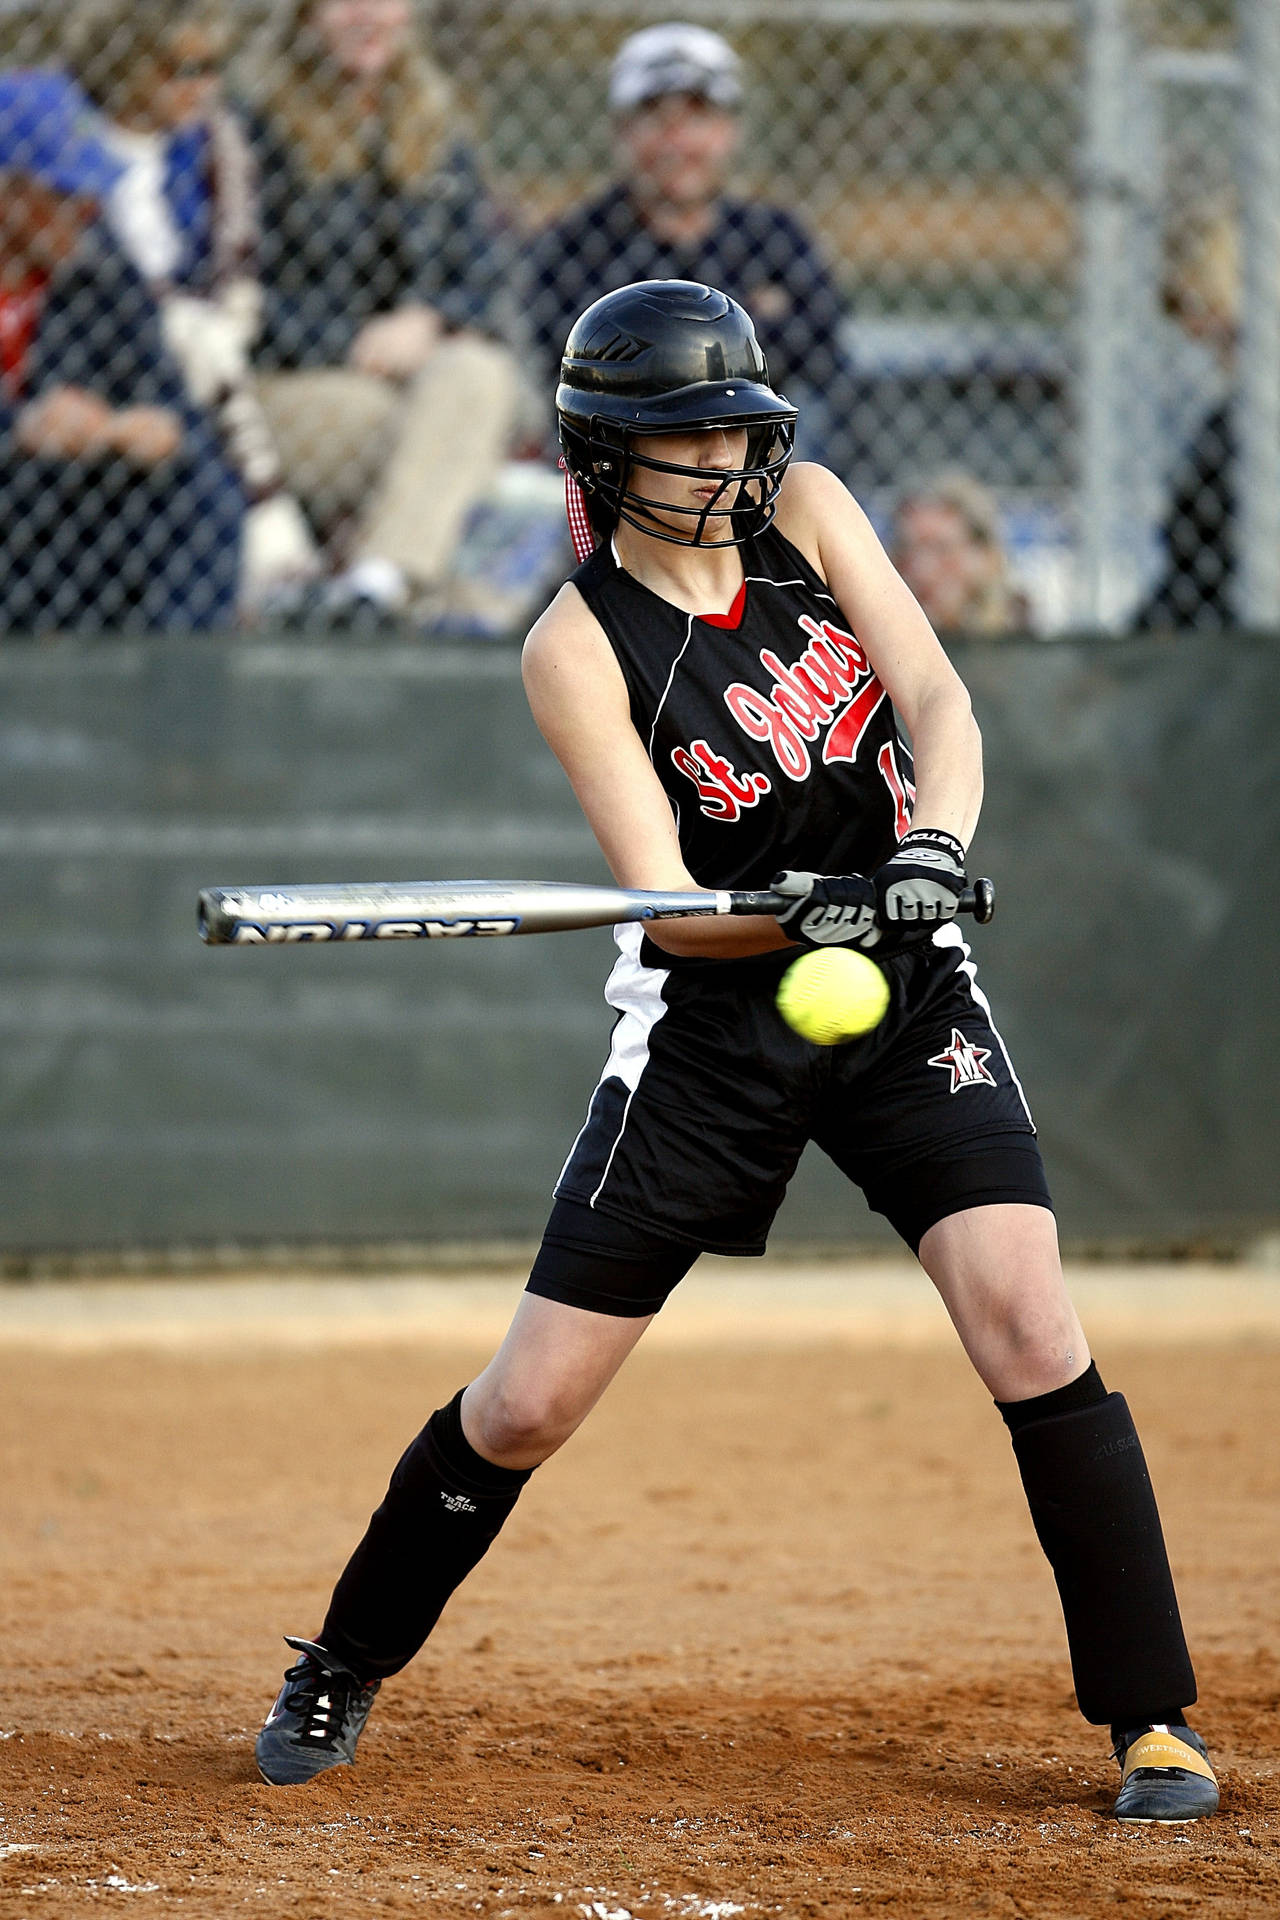 Softball 2336X3504 Wallpaper and Background Image